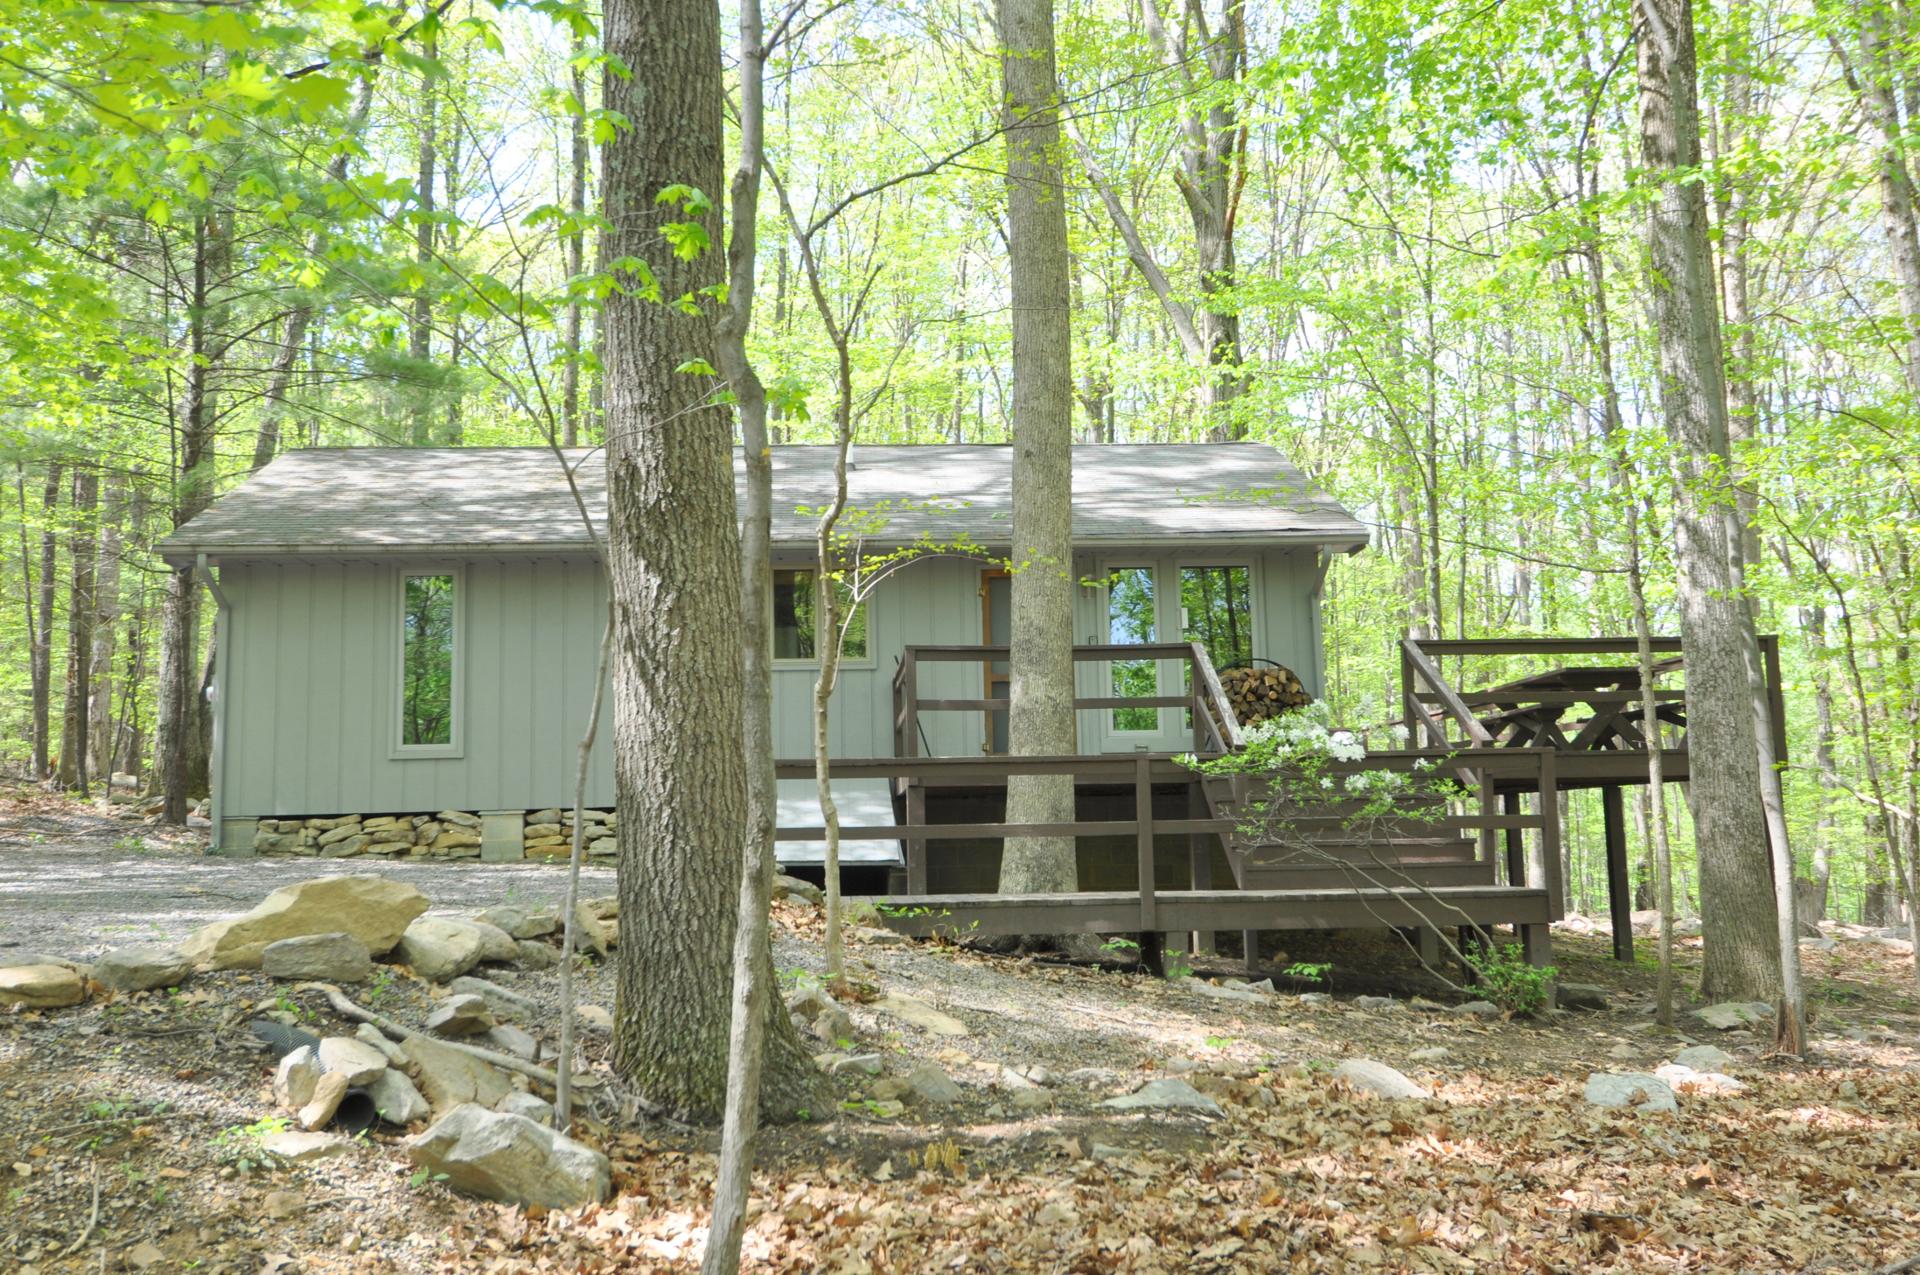 Cottage Cabin Rental Specials Discounts From Berkeley Springs